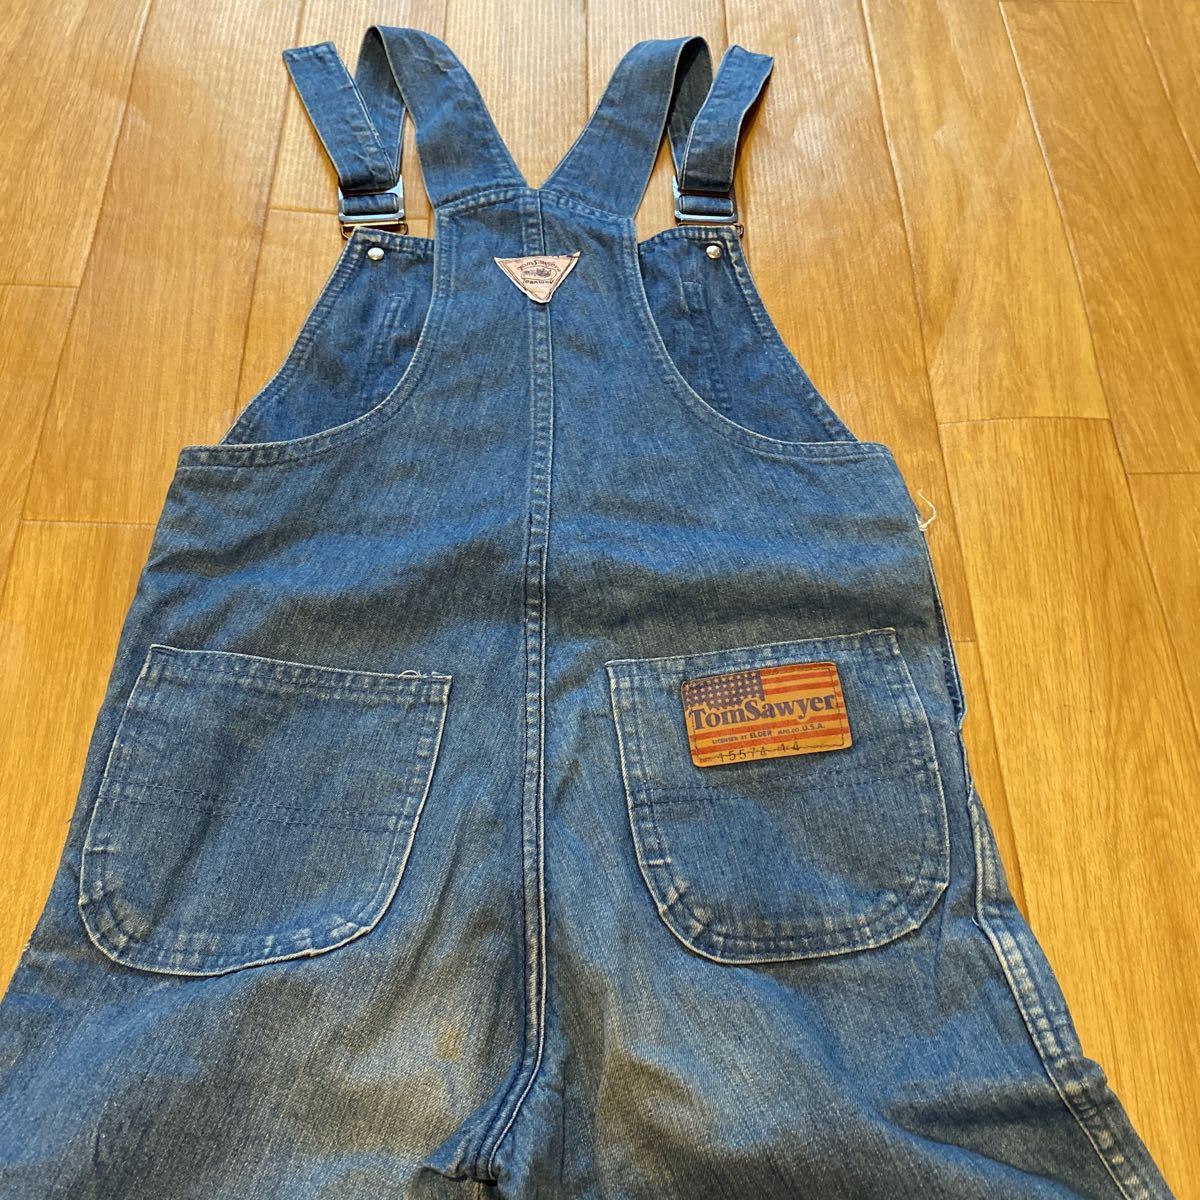  free shipping that time thing old clothes [ Tom so-ya- for children overall ] ELDER MFG.co.U.S.A.